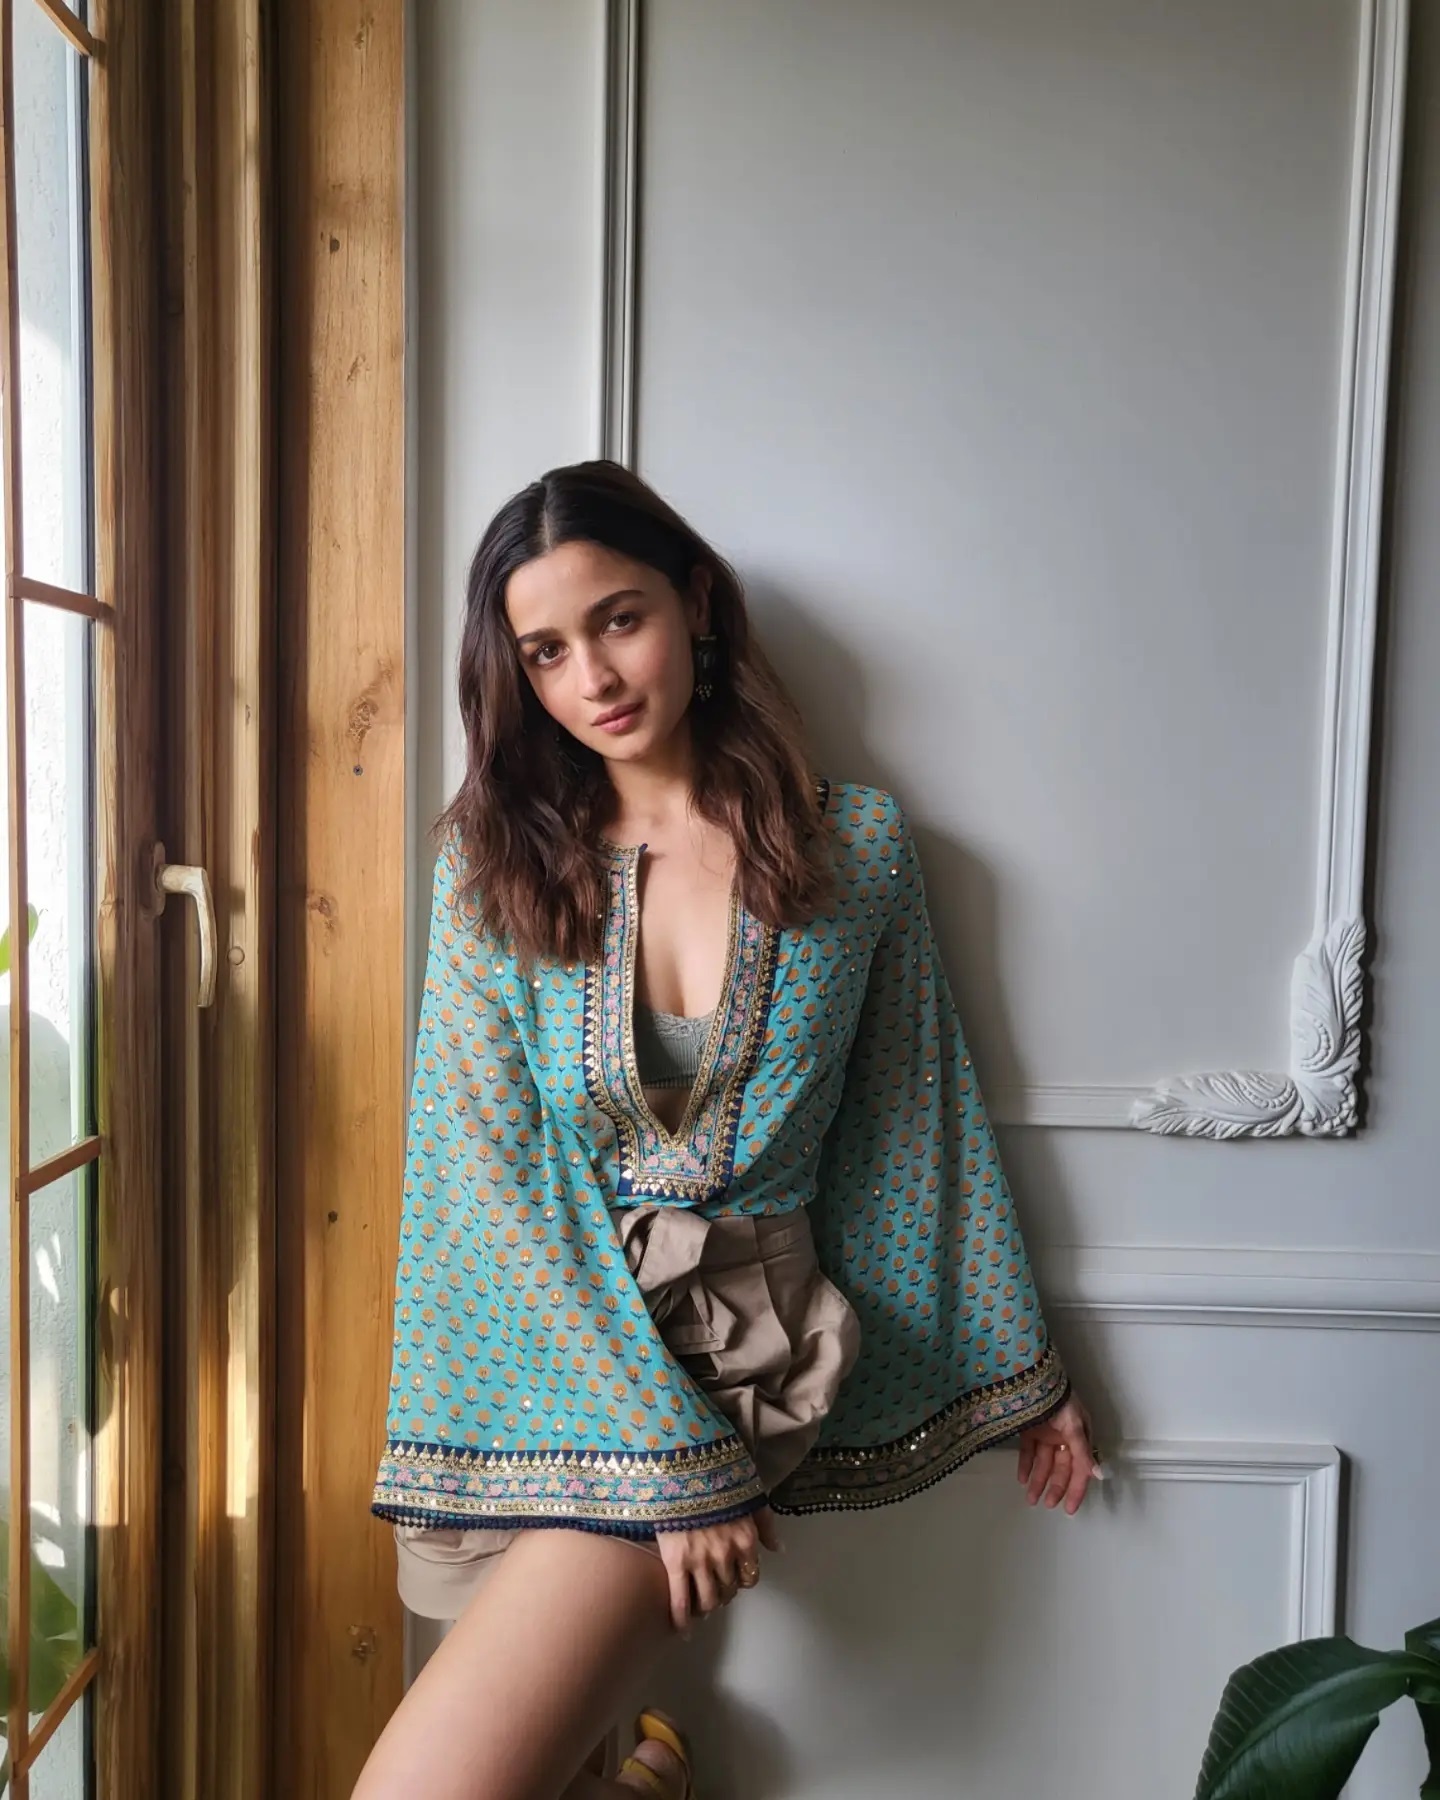 A Deep Dive into Alia Bhatt's Top 10 Best Outfits